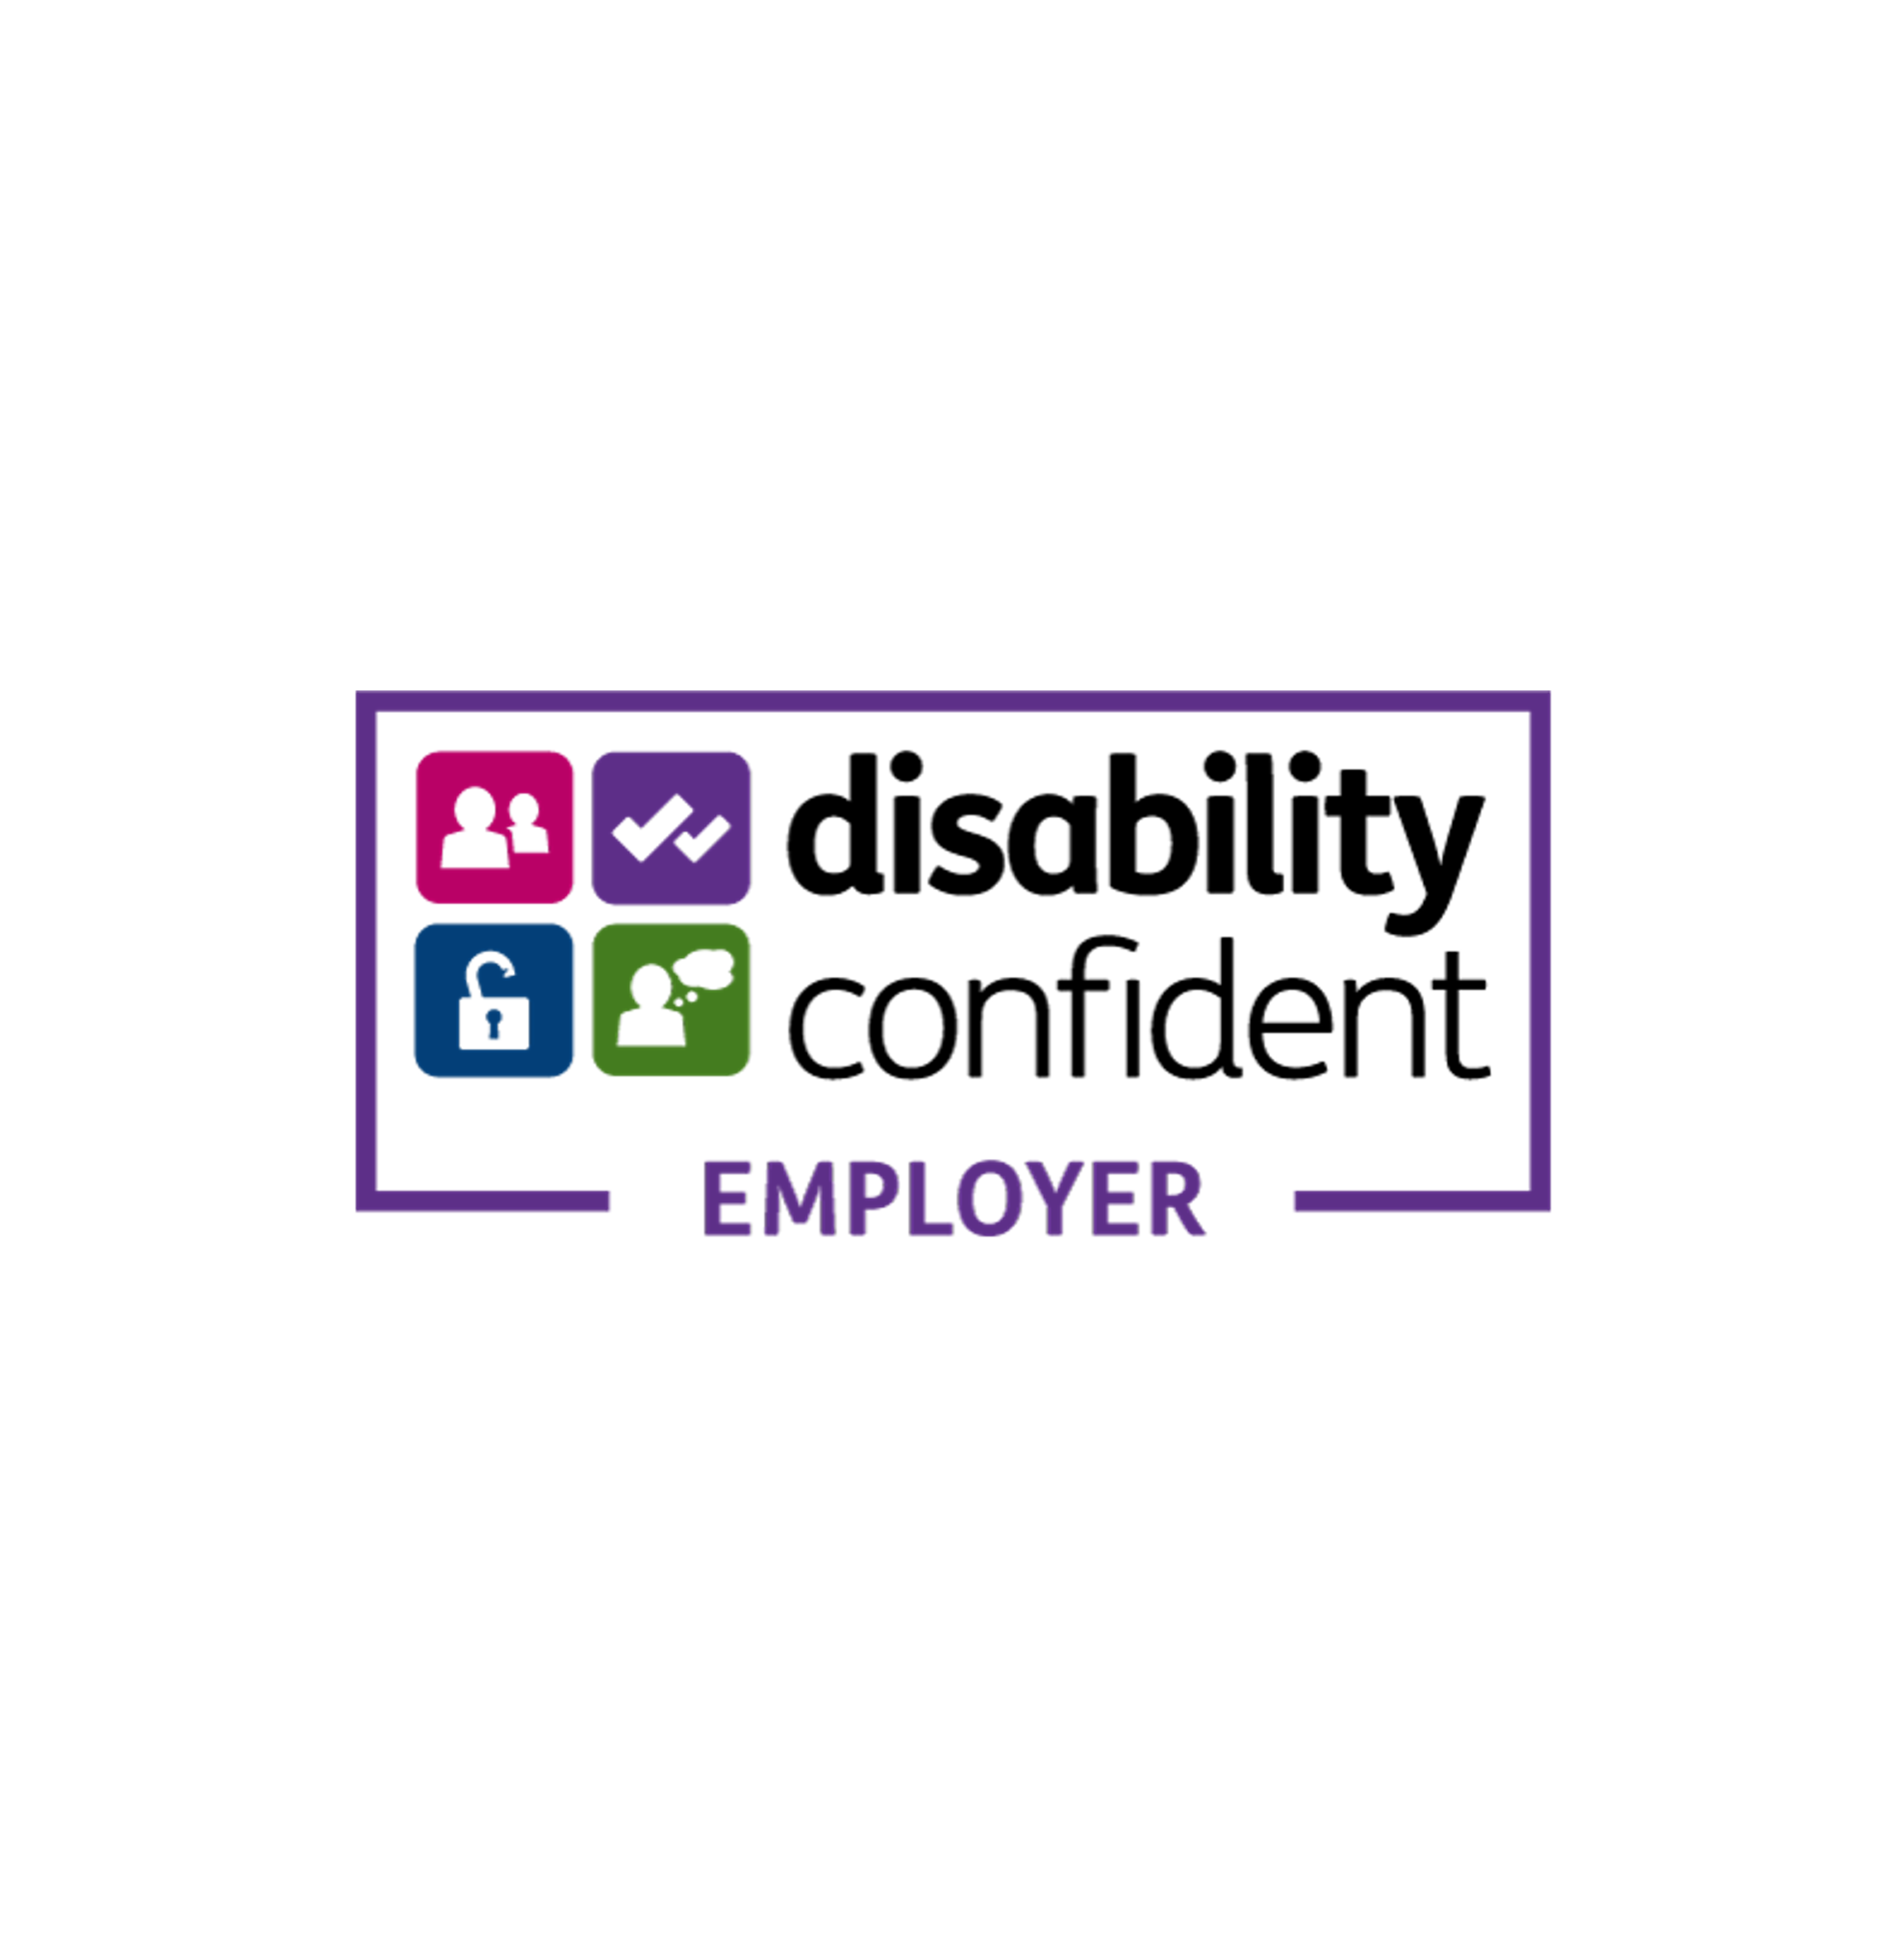 Met Office Jobs - Careers Website - Disability Confident Employer Logo.png